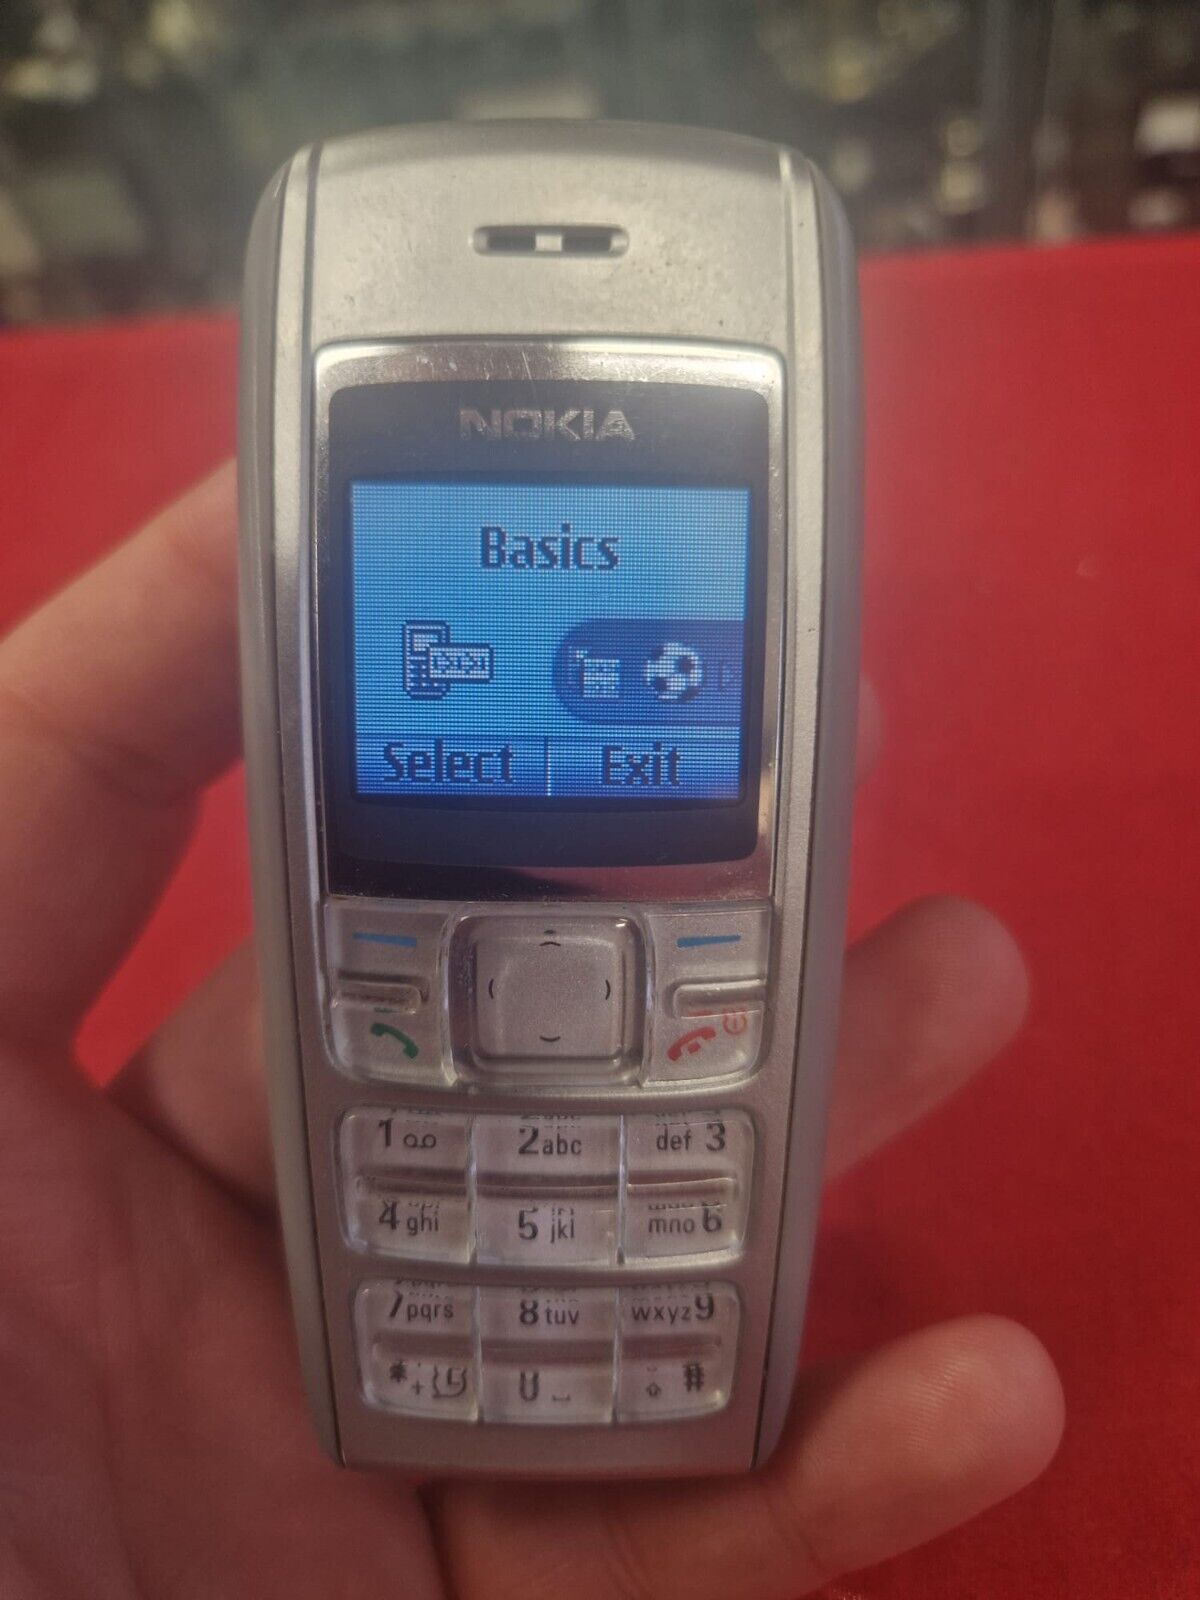 Vintage - Nokia 1600 RH-64 Silver Mobile Phone w/ Charger Tested & Working  - Ossett Antiques | Antiques for Sale, Buy Rare Antiques